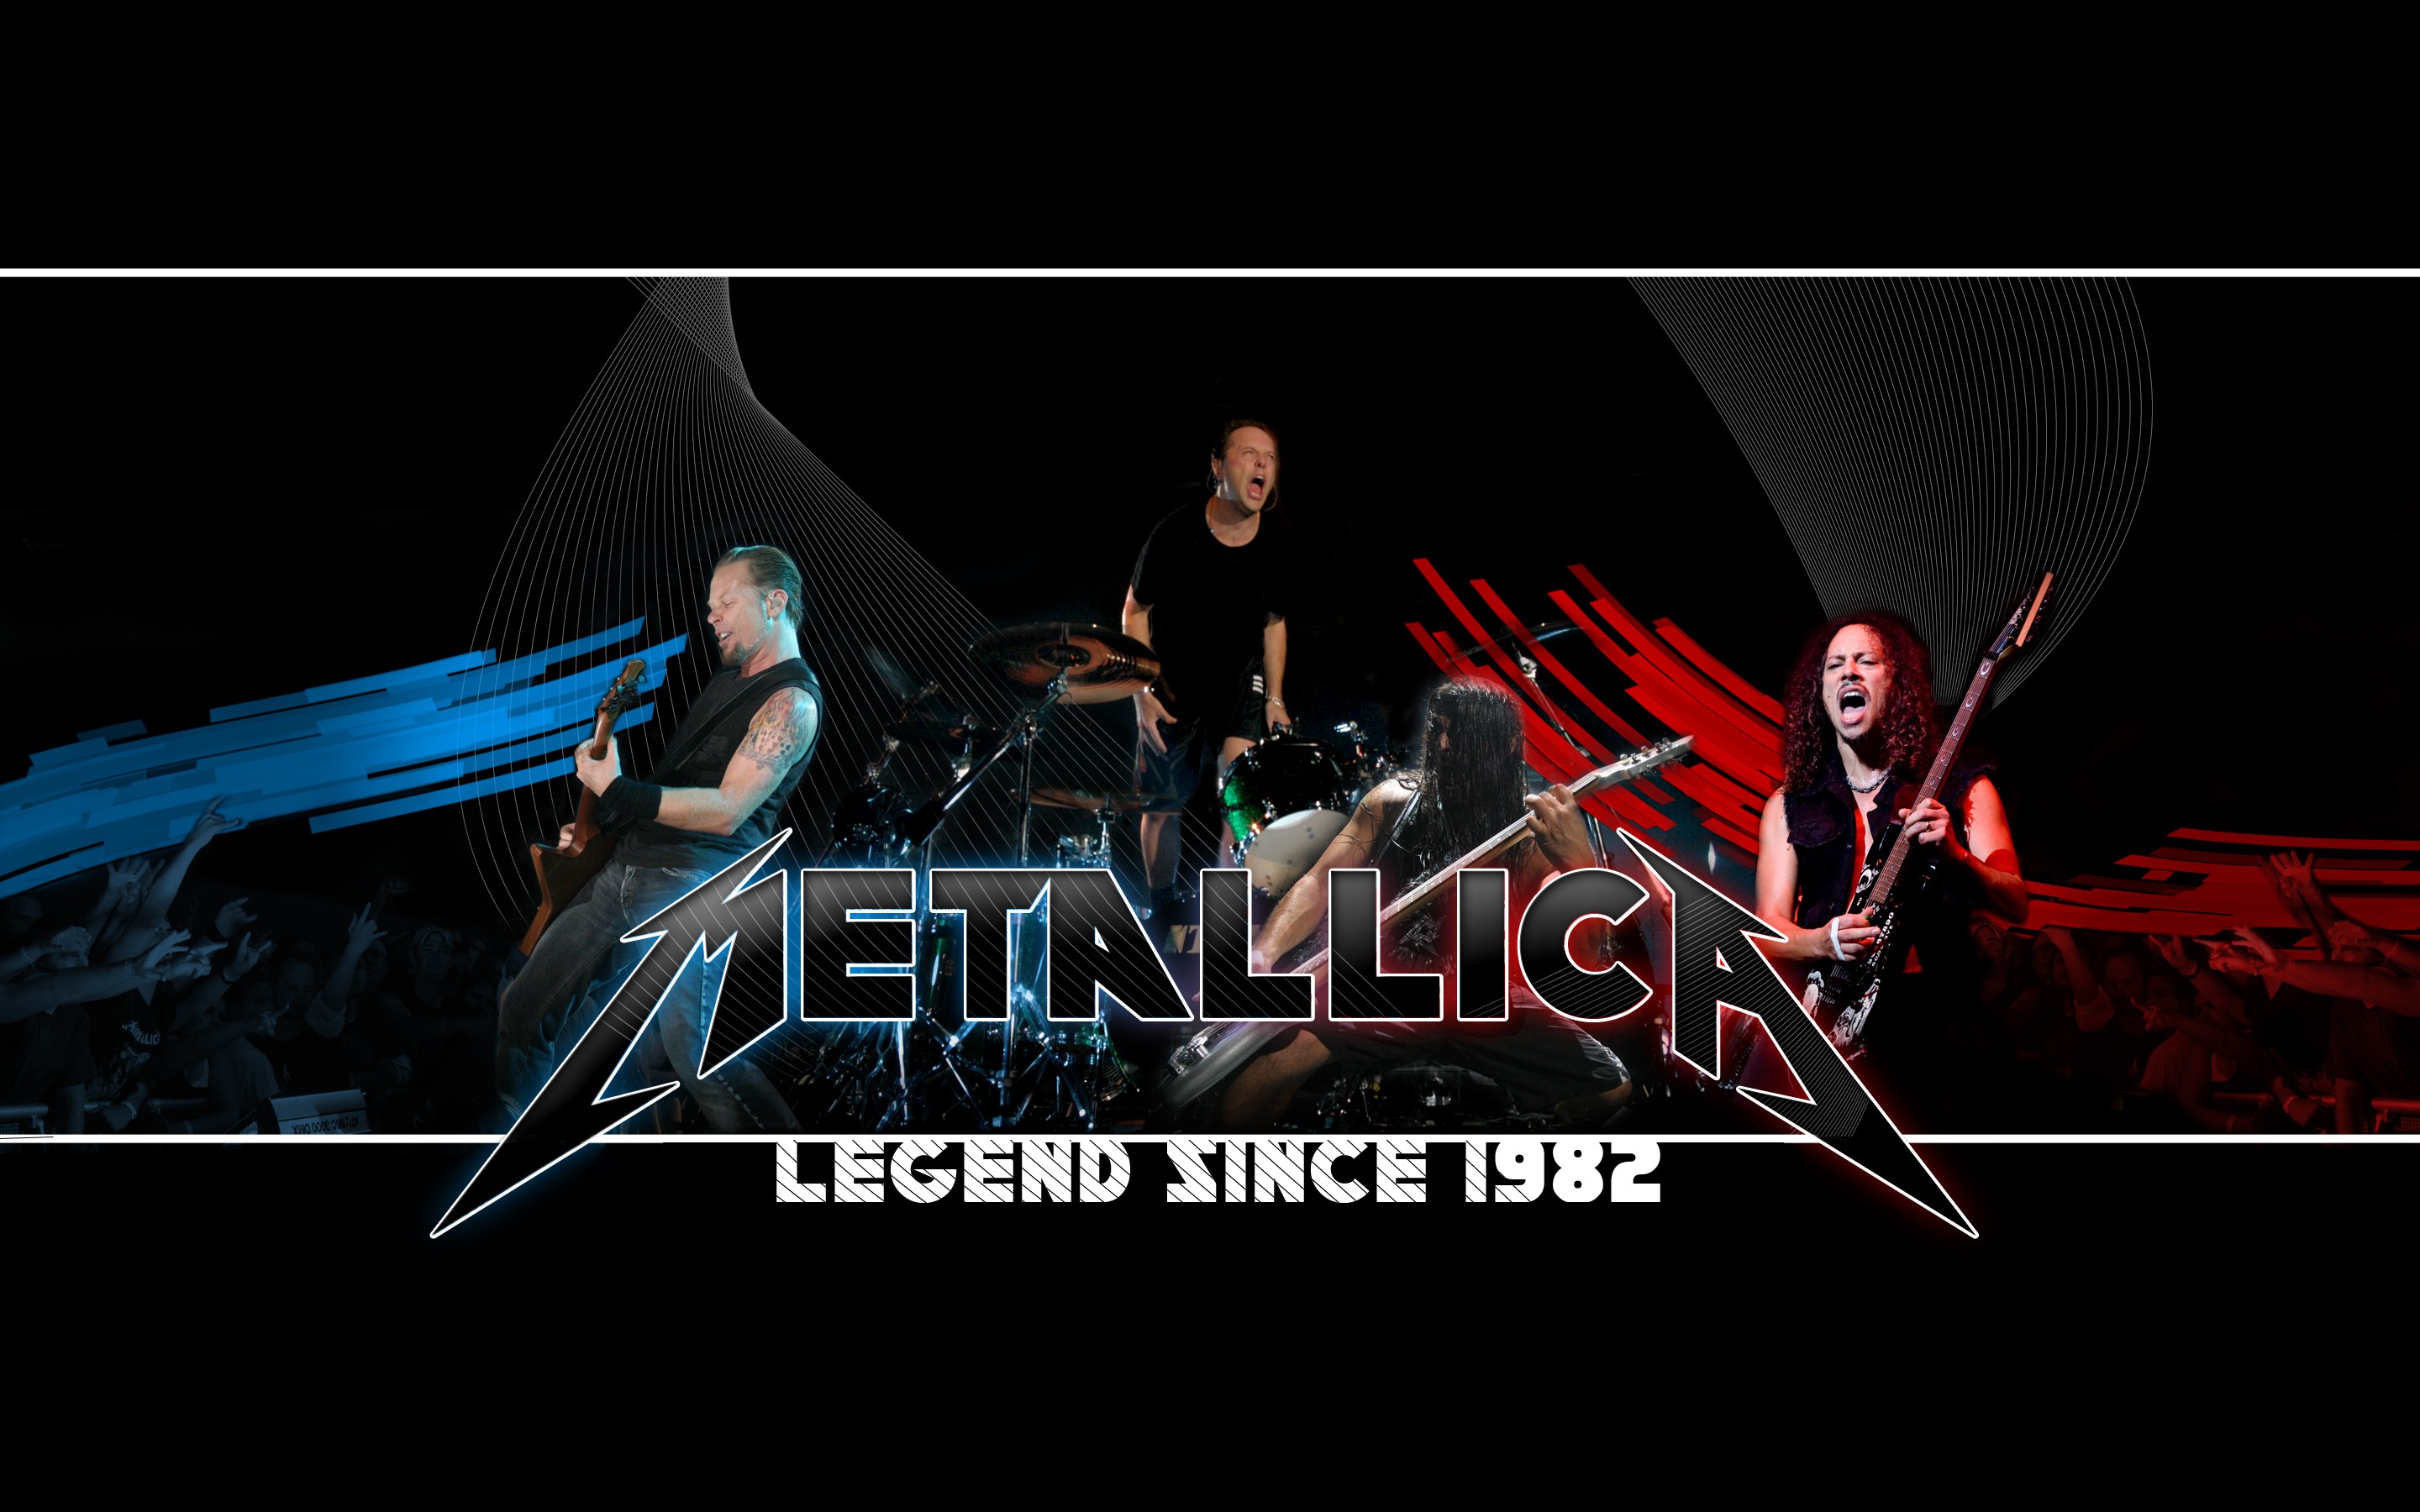 Metallica wallpaper ·① Download free awesome wallpapers ...